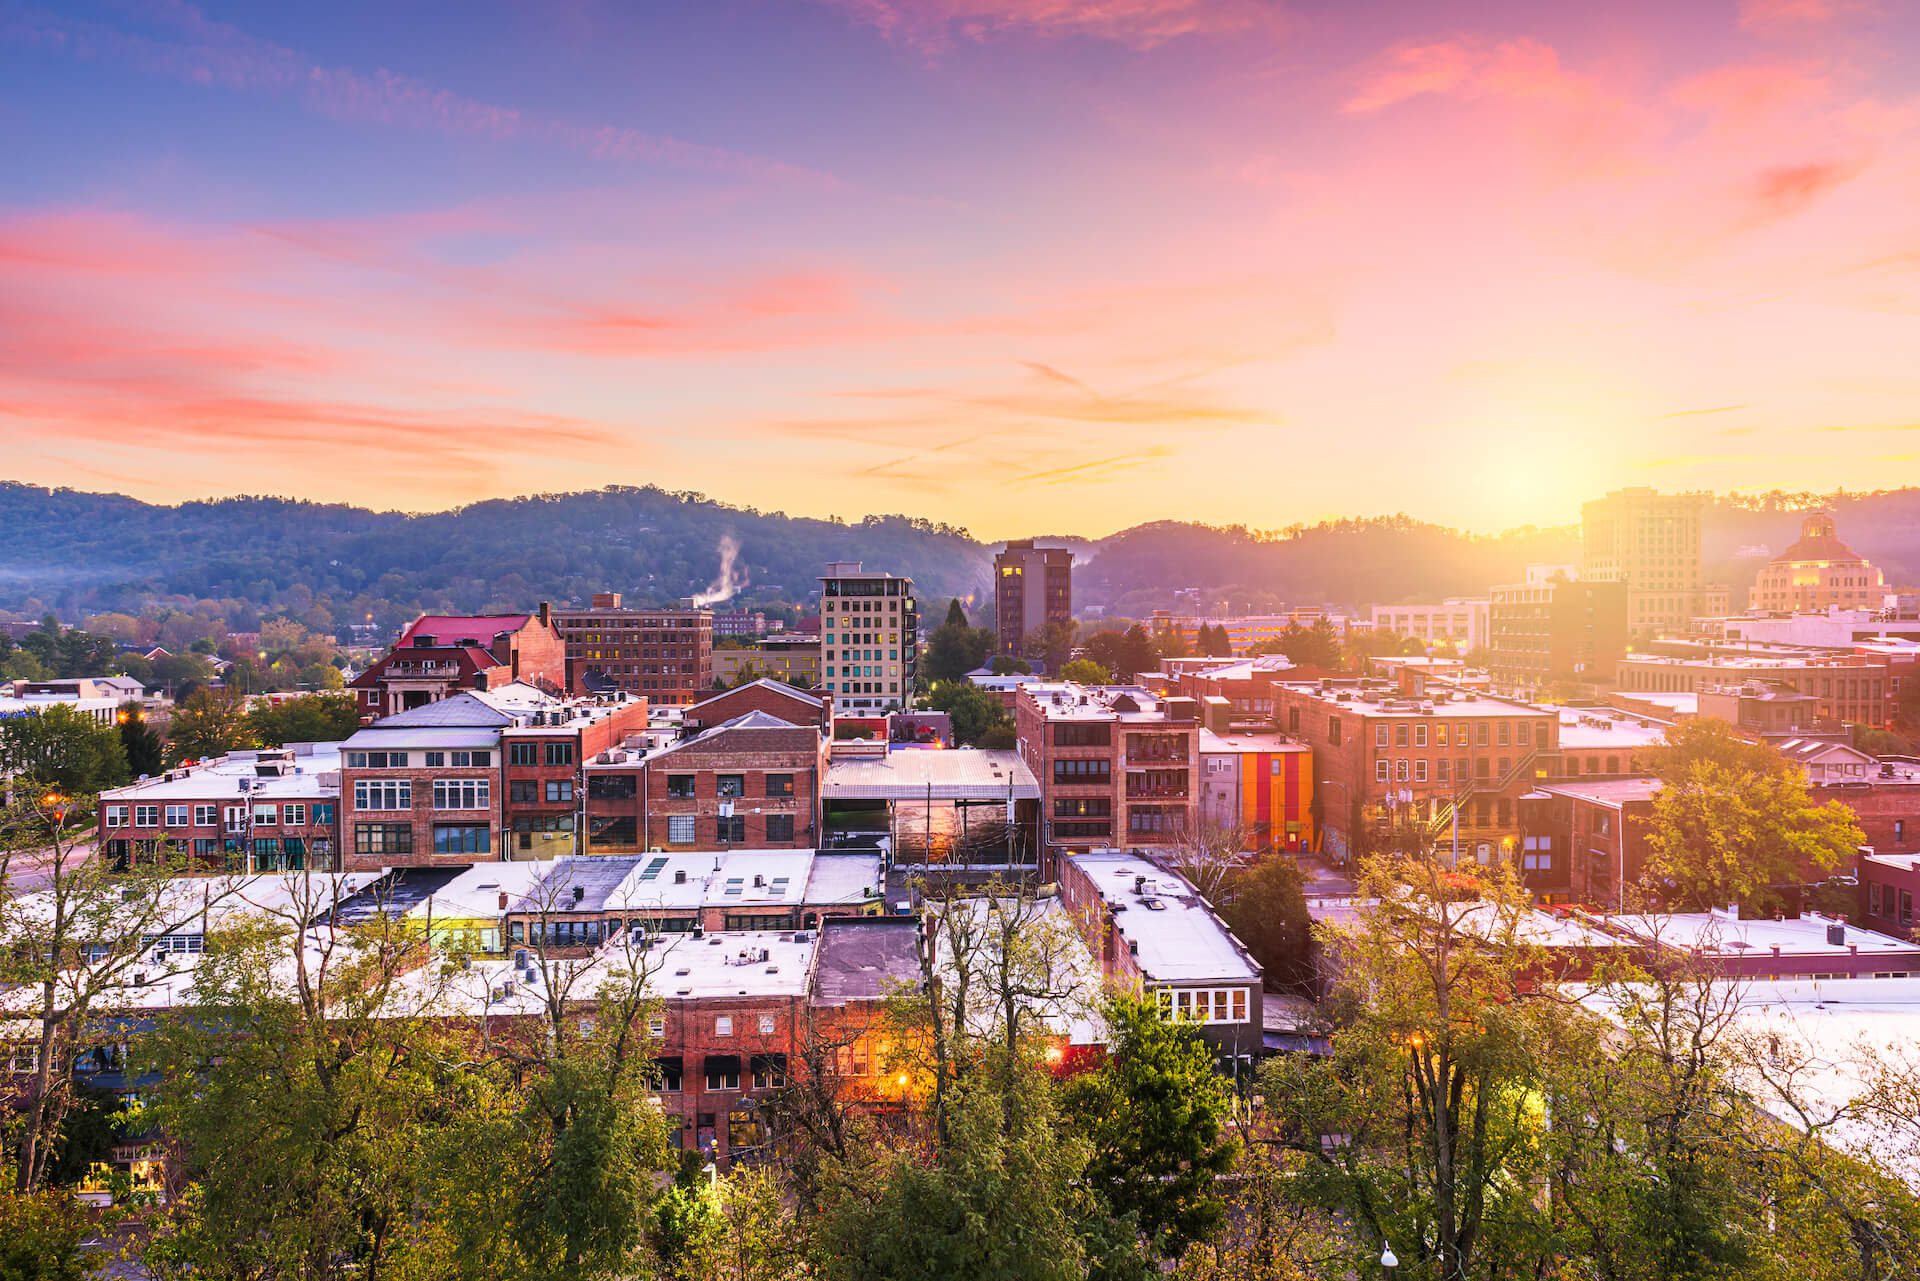 11Aerial view of downtown Asheville at sunset